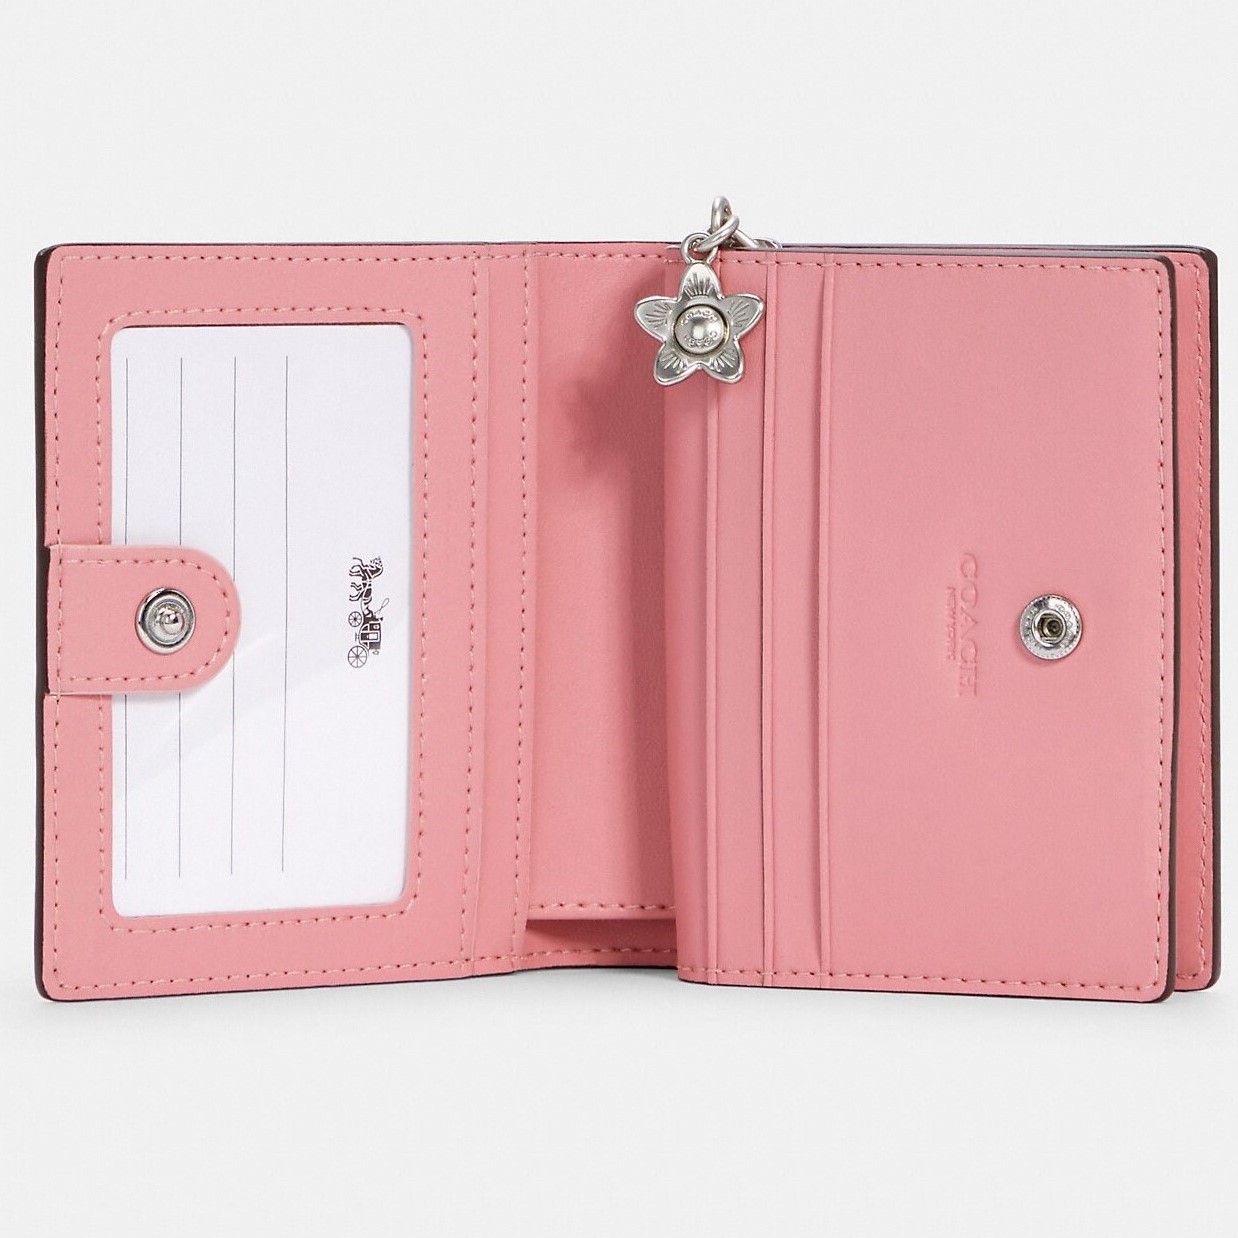 VÍ NỮ NGẮN LIMITED COACH BOXED SNAP WALLET WITH DAISY PRINT C2889 2